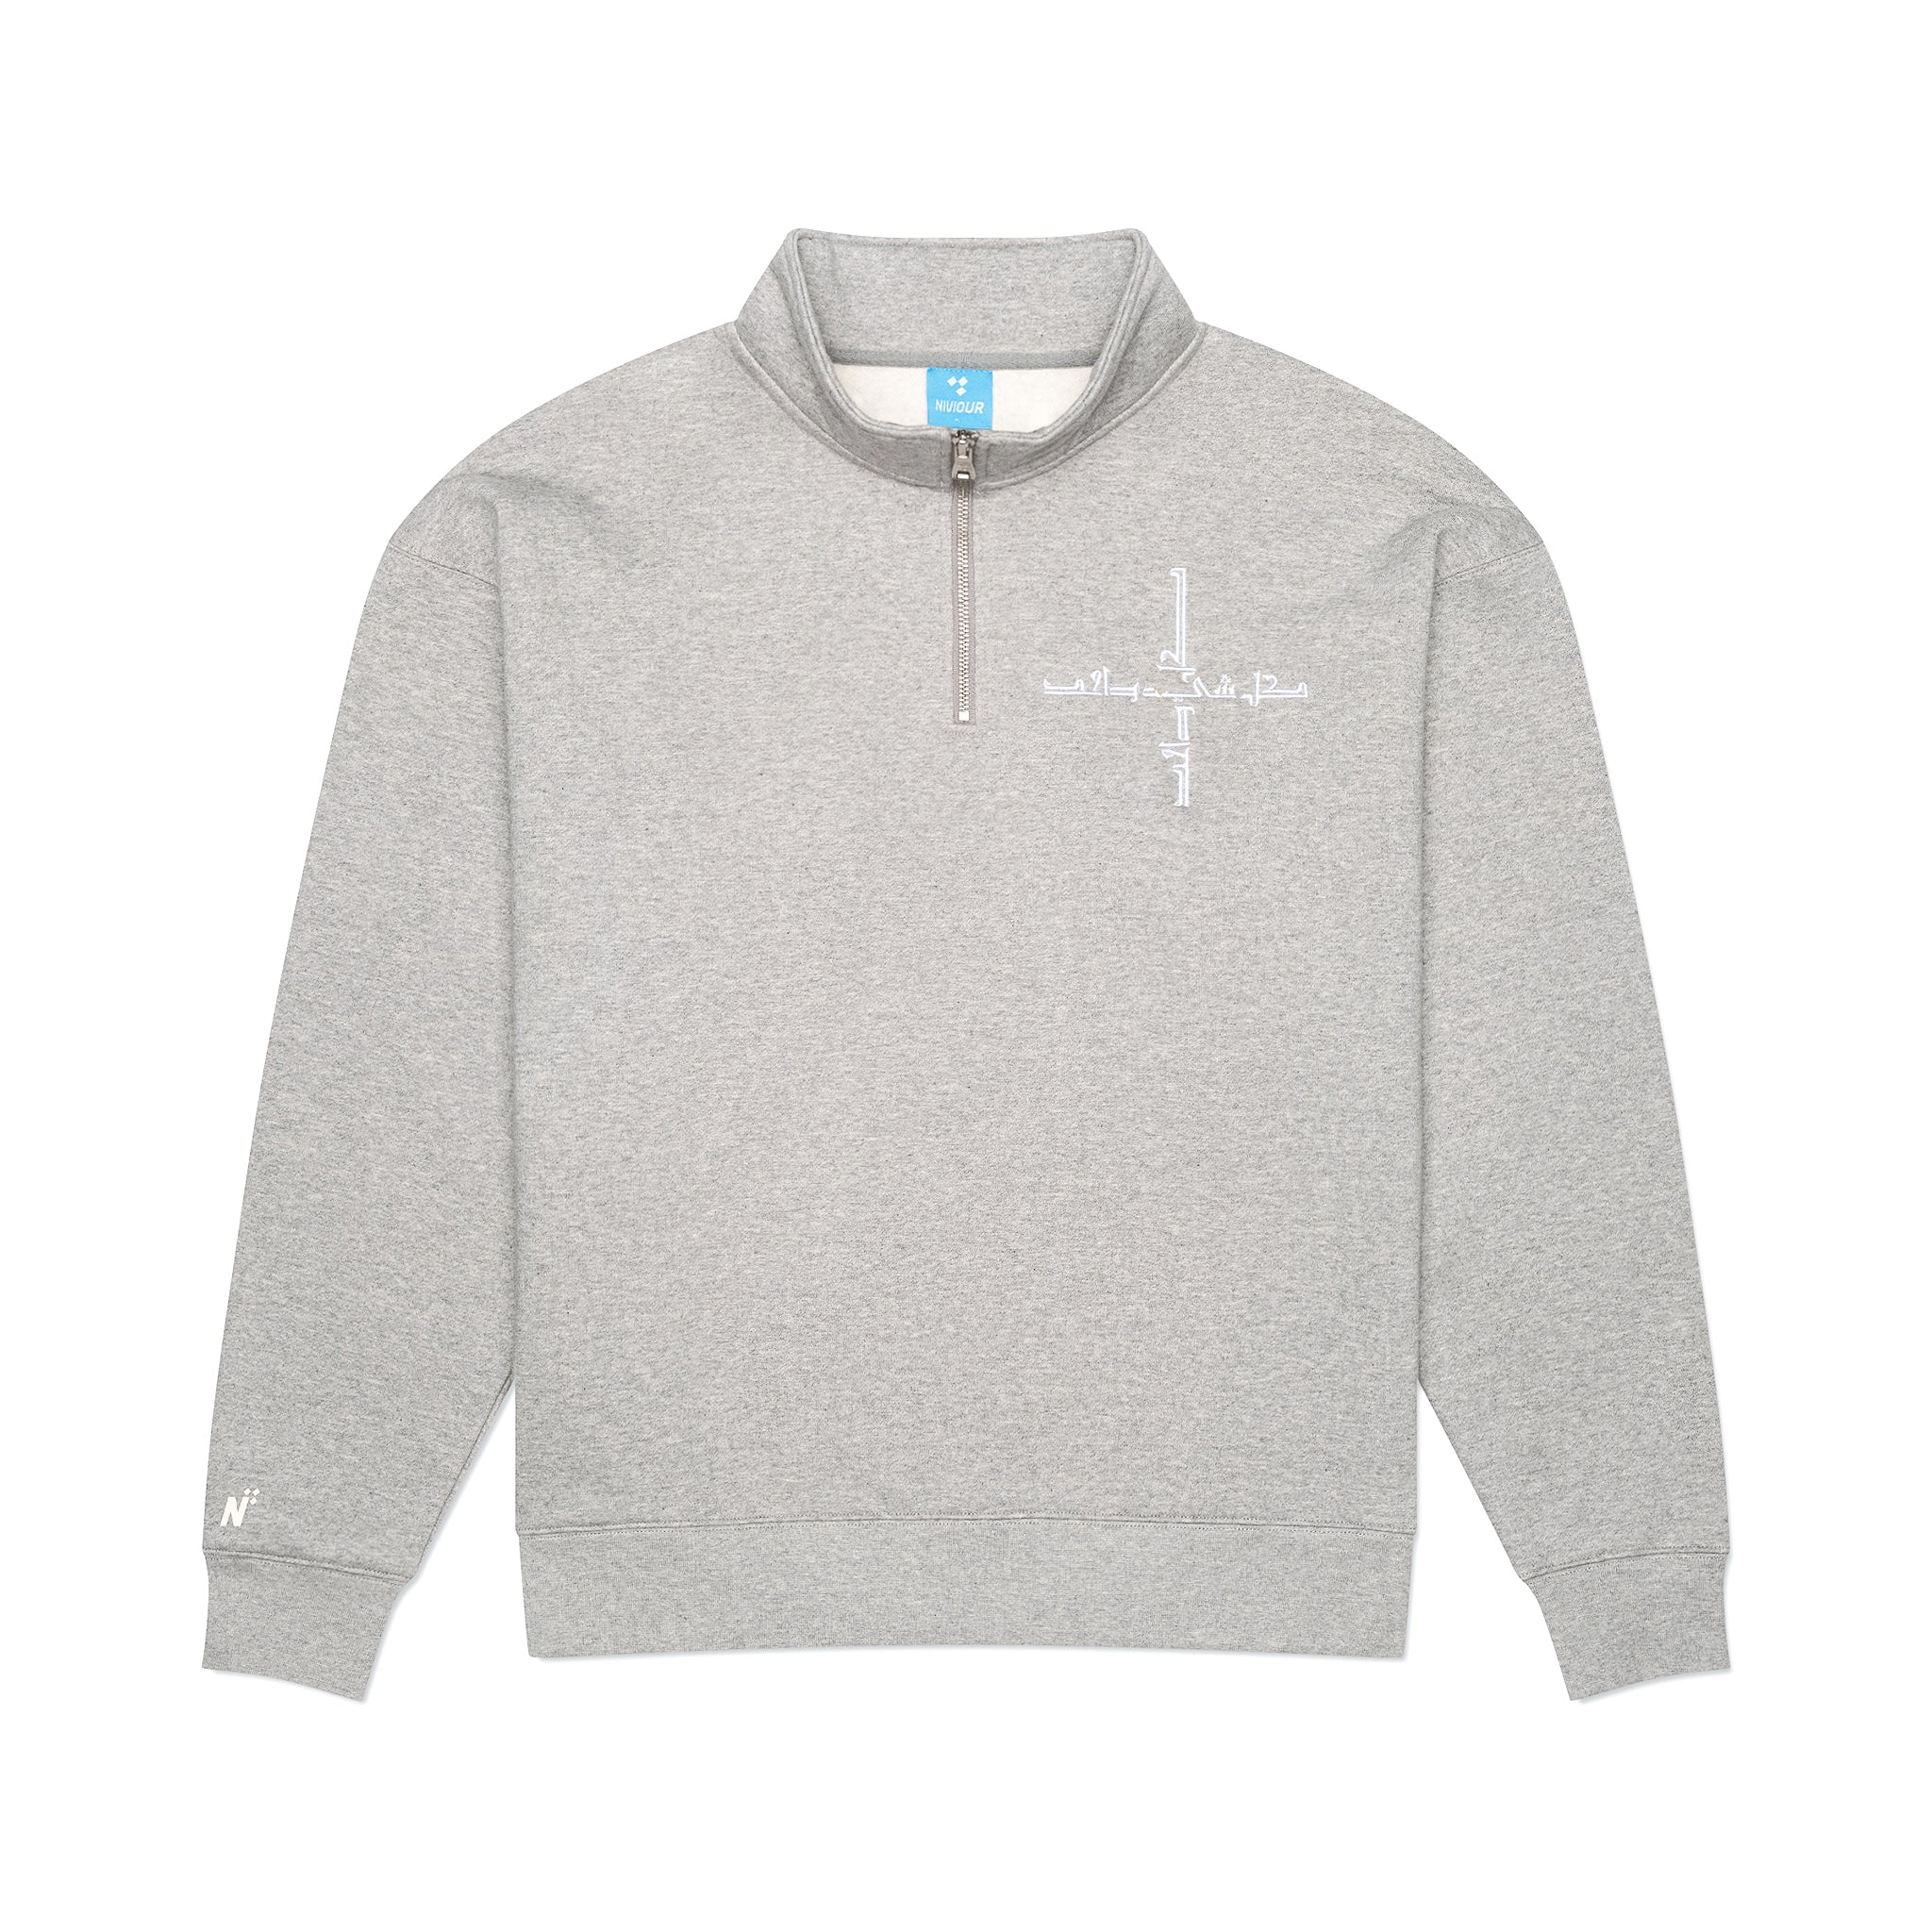 All Things Are One Quarter-Zip